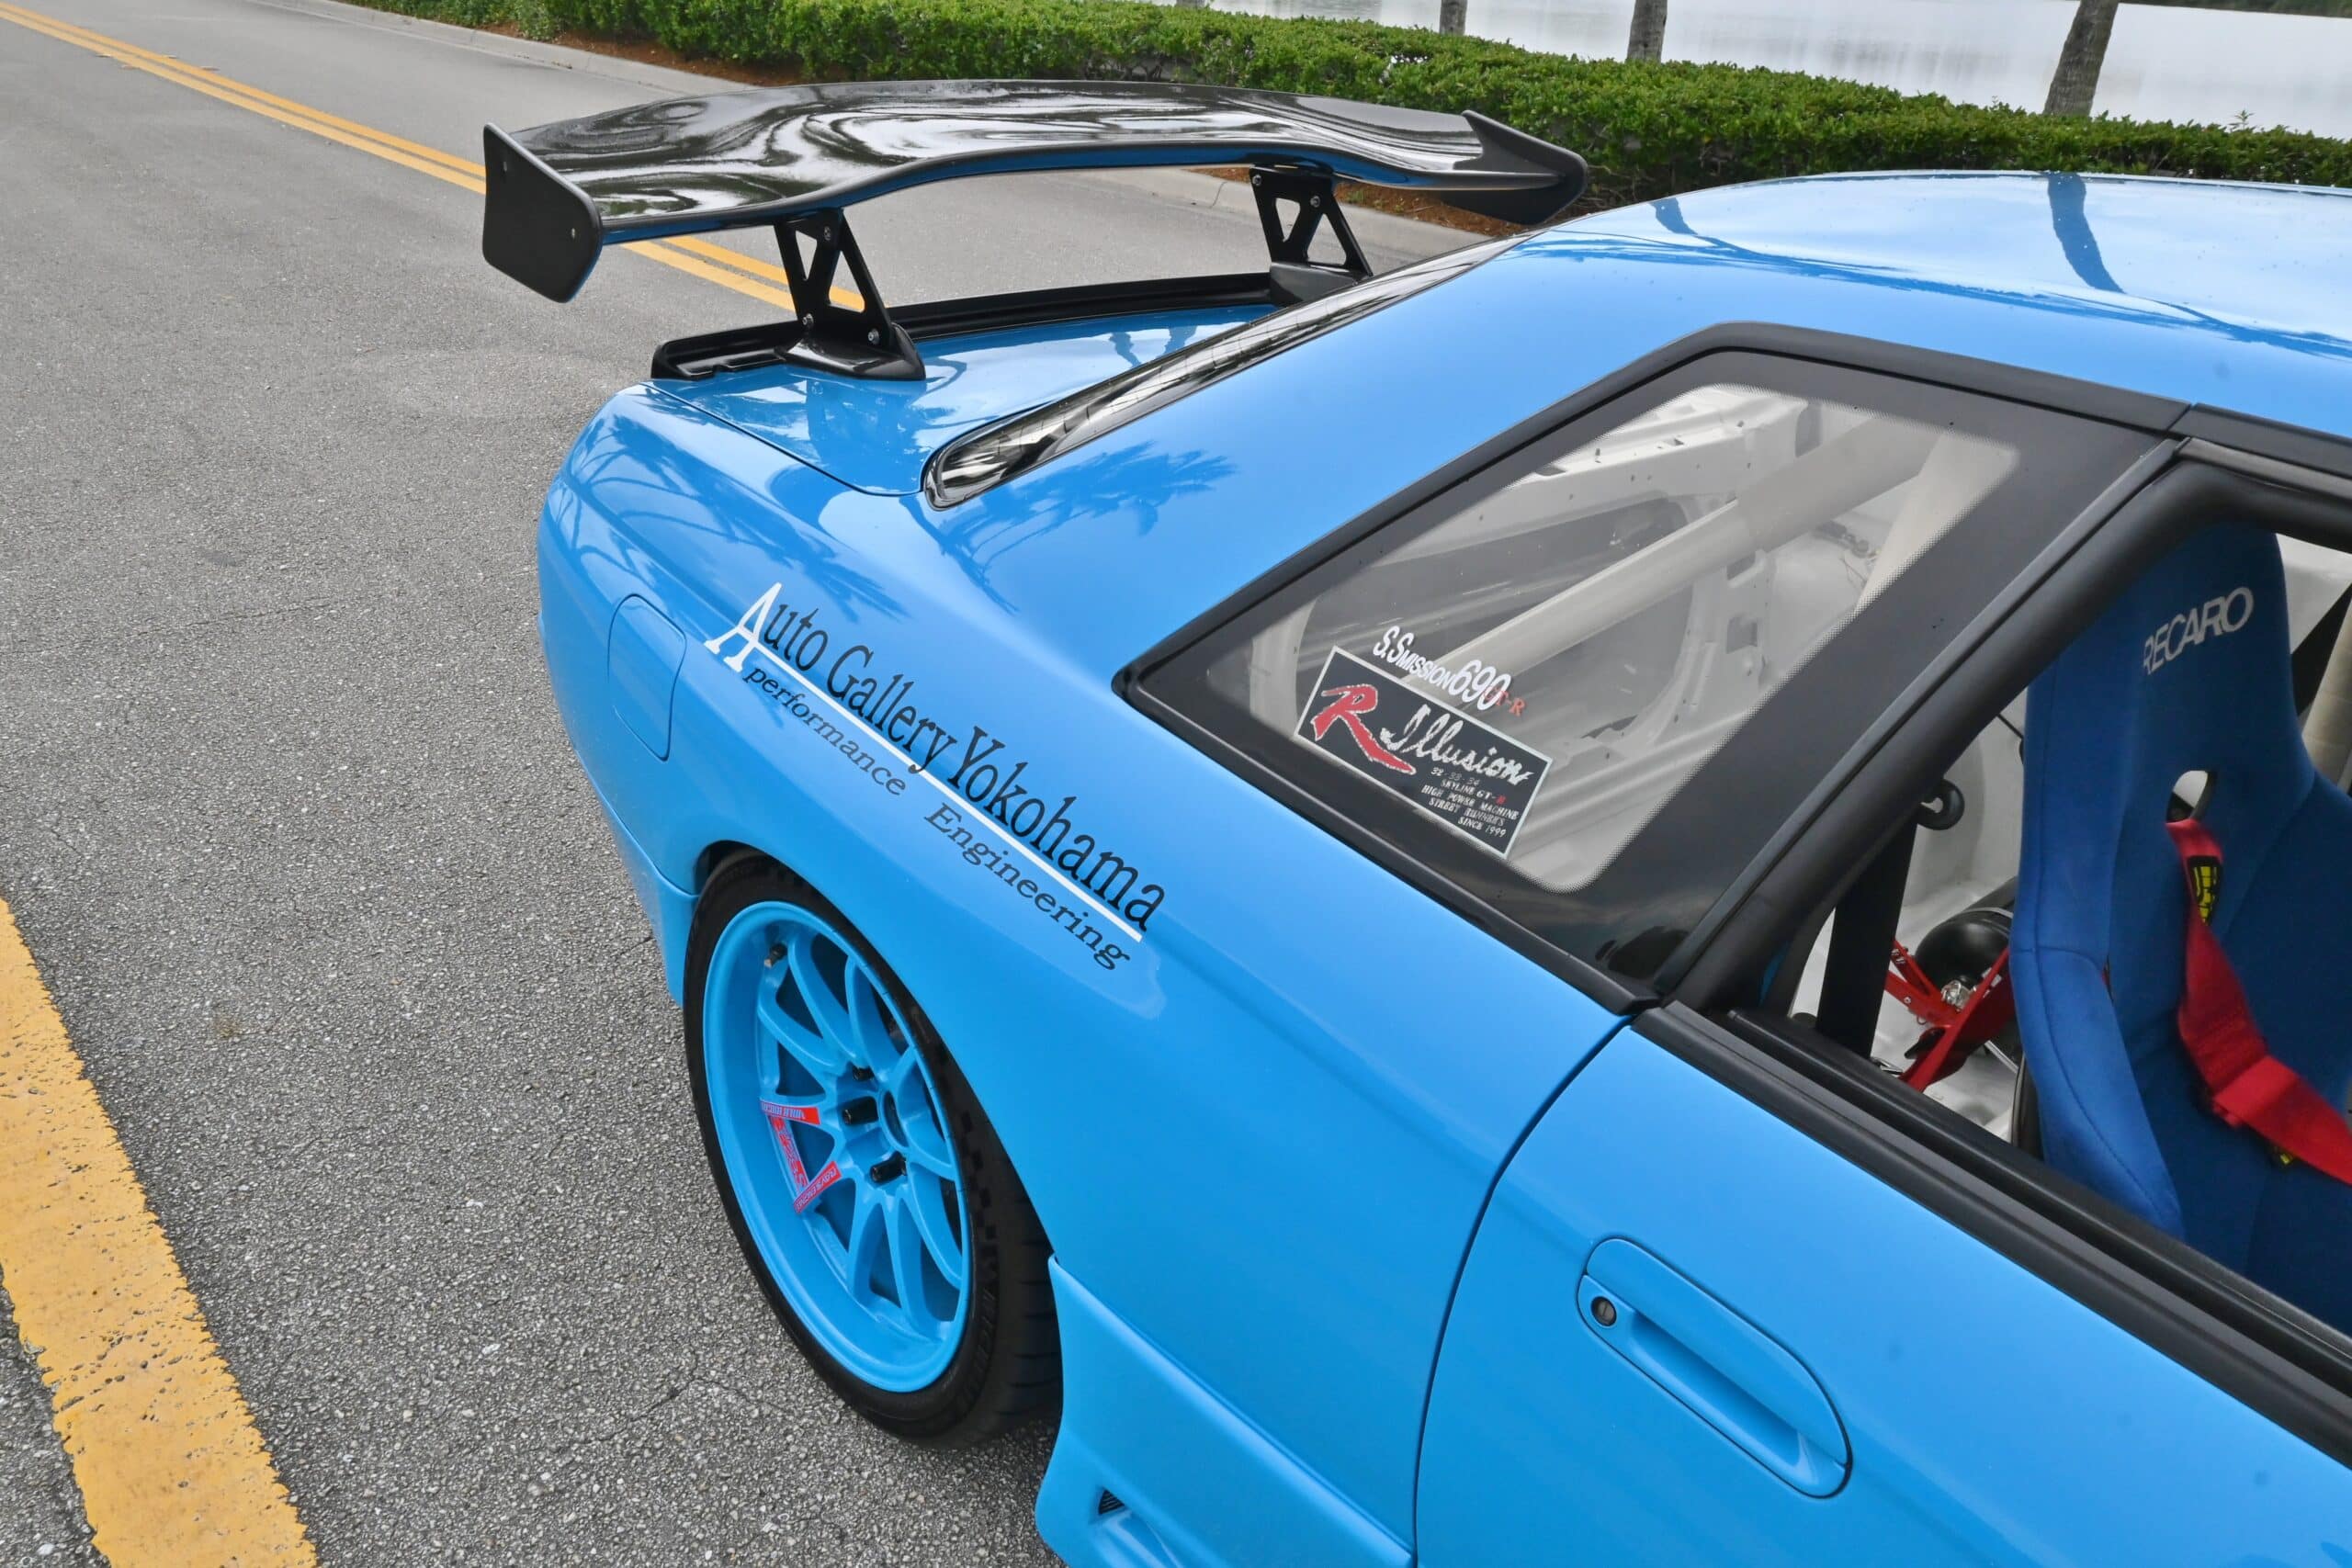 1994 Nissan GT-R R32 Skyline Time Attack/ Street | AG-Y Demo Car | 550PS | HKS Turbos | Full Build | Alcon